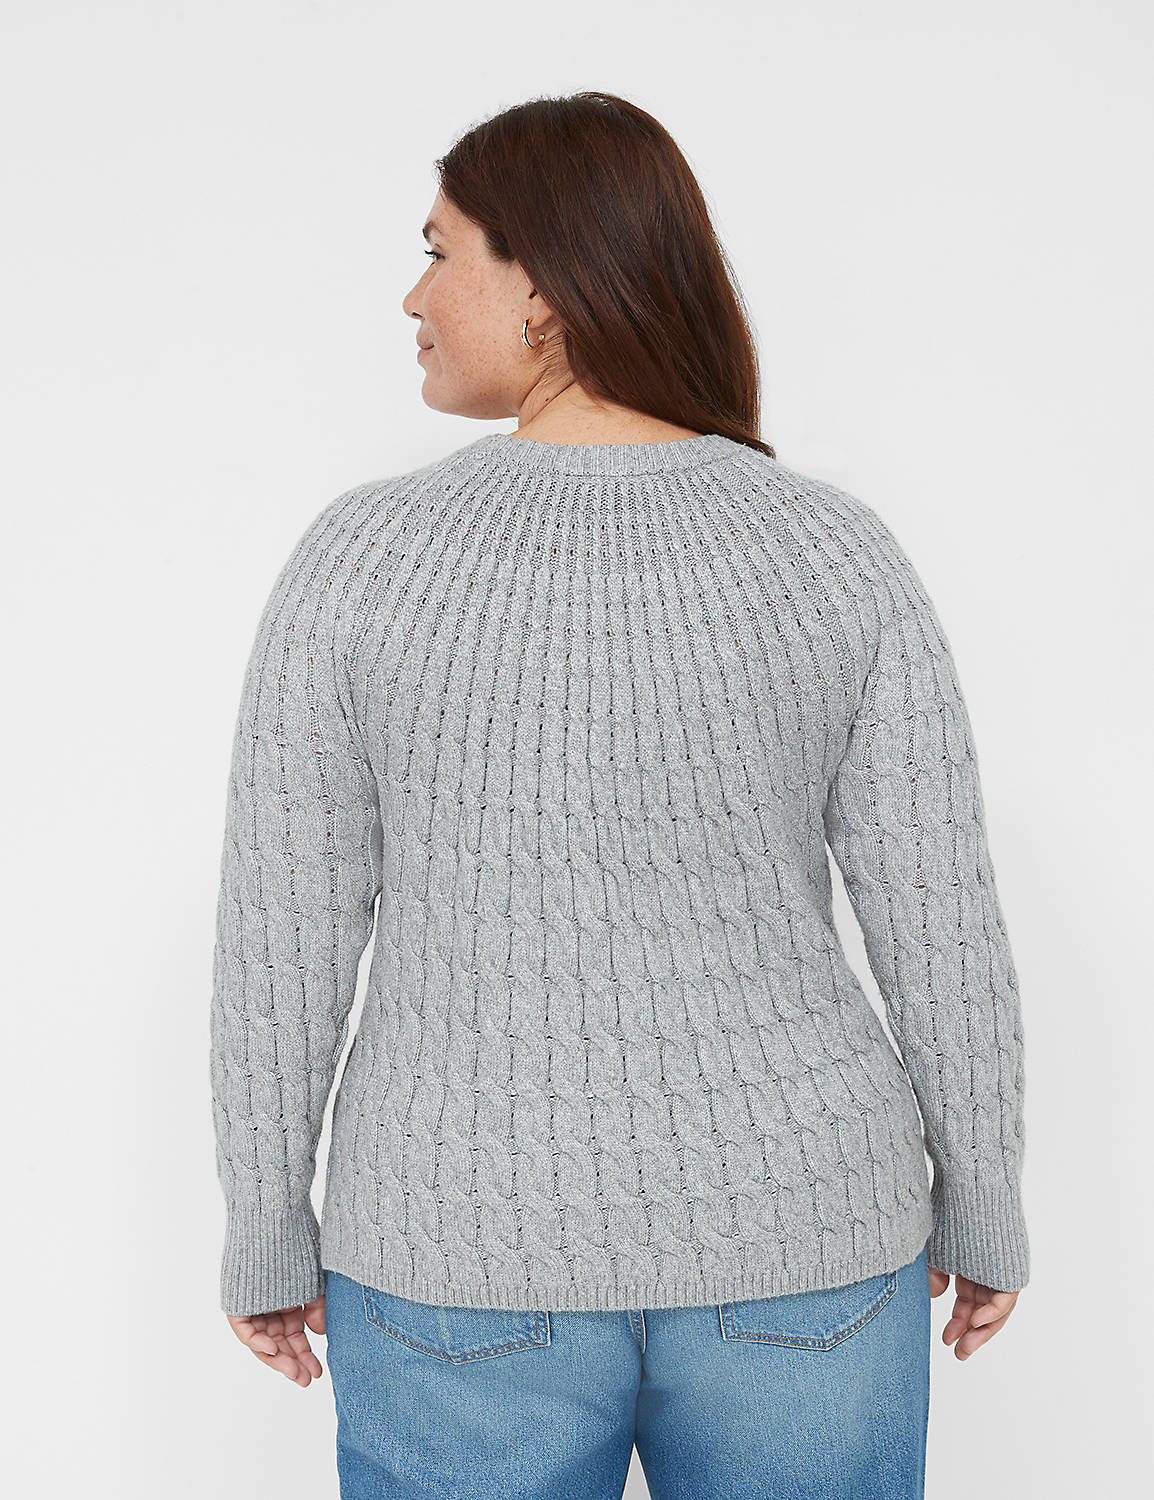 Classic Long Sleeve Round Neck Cabl Product Image 2